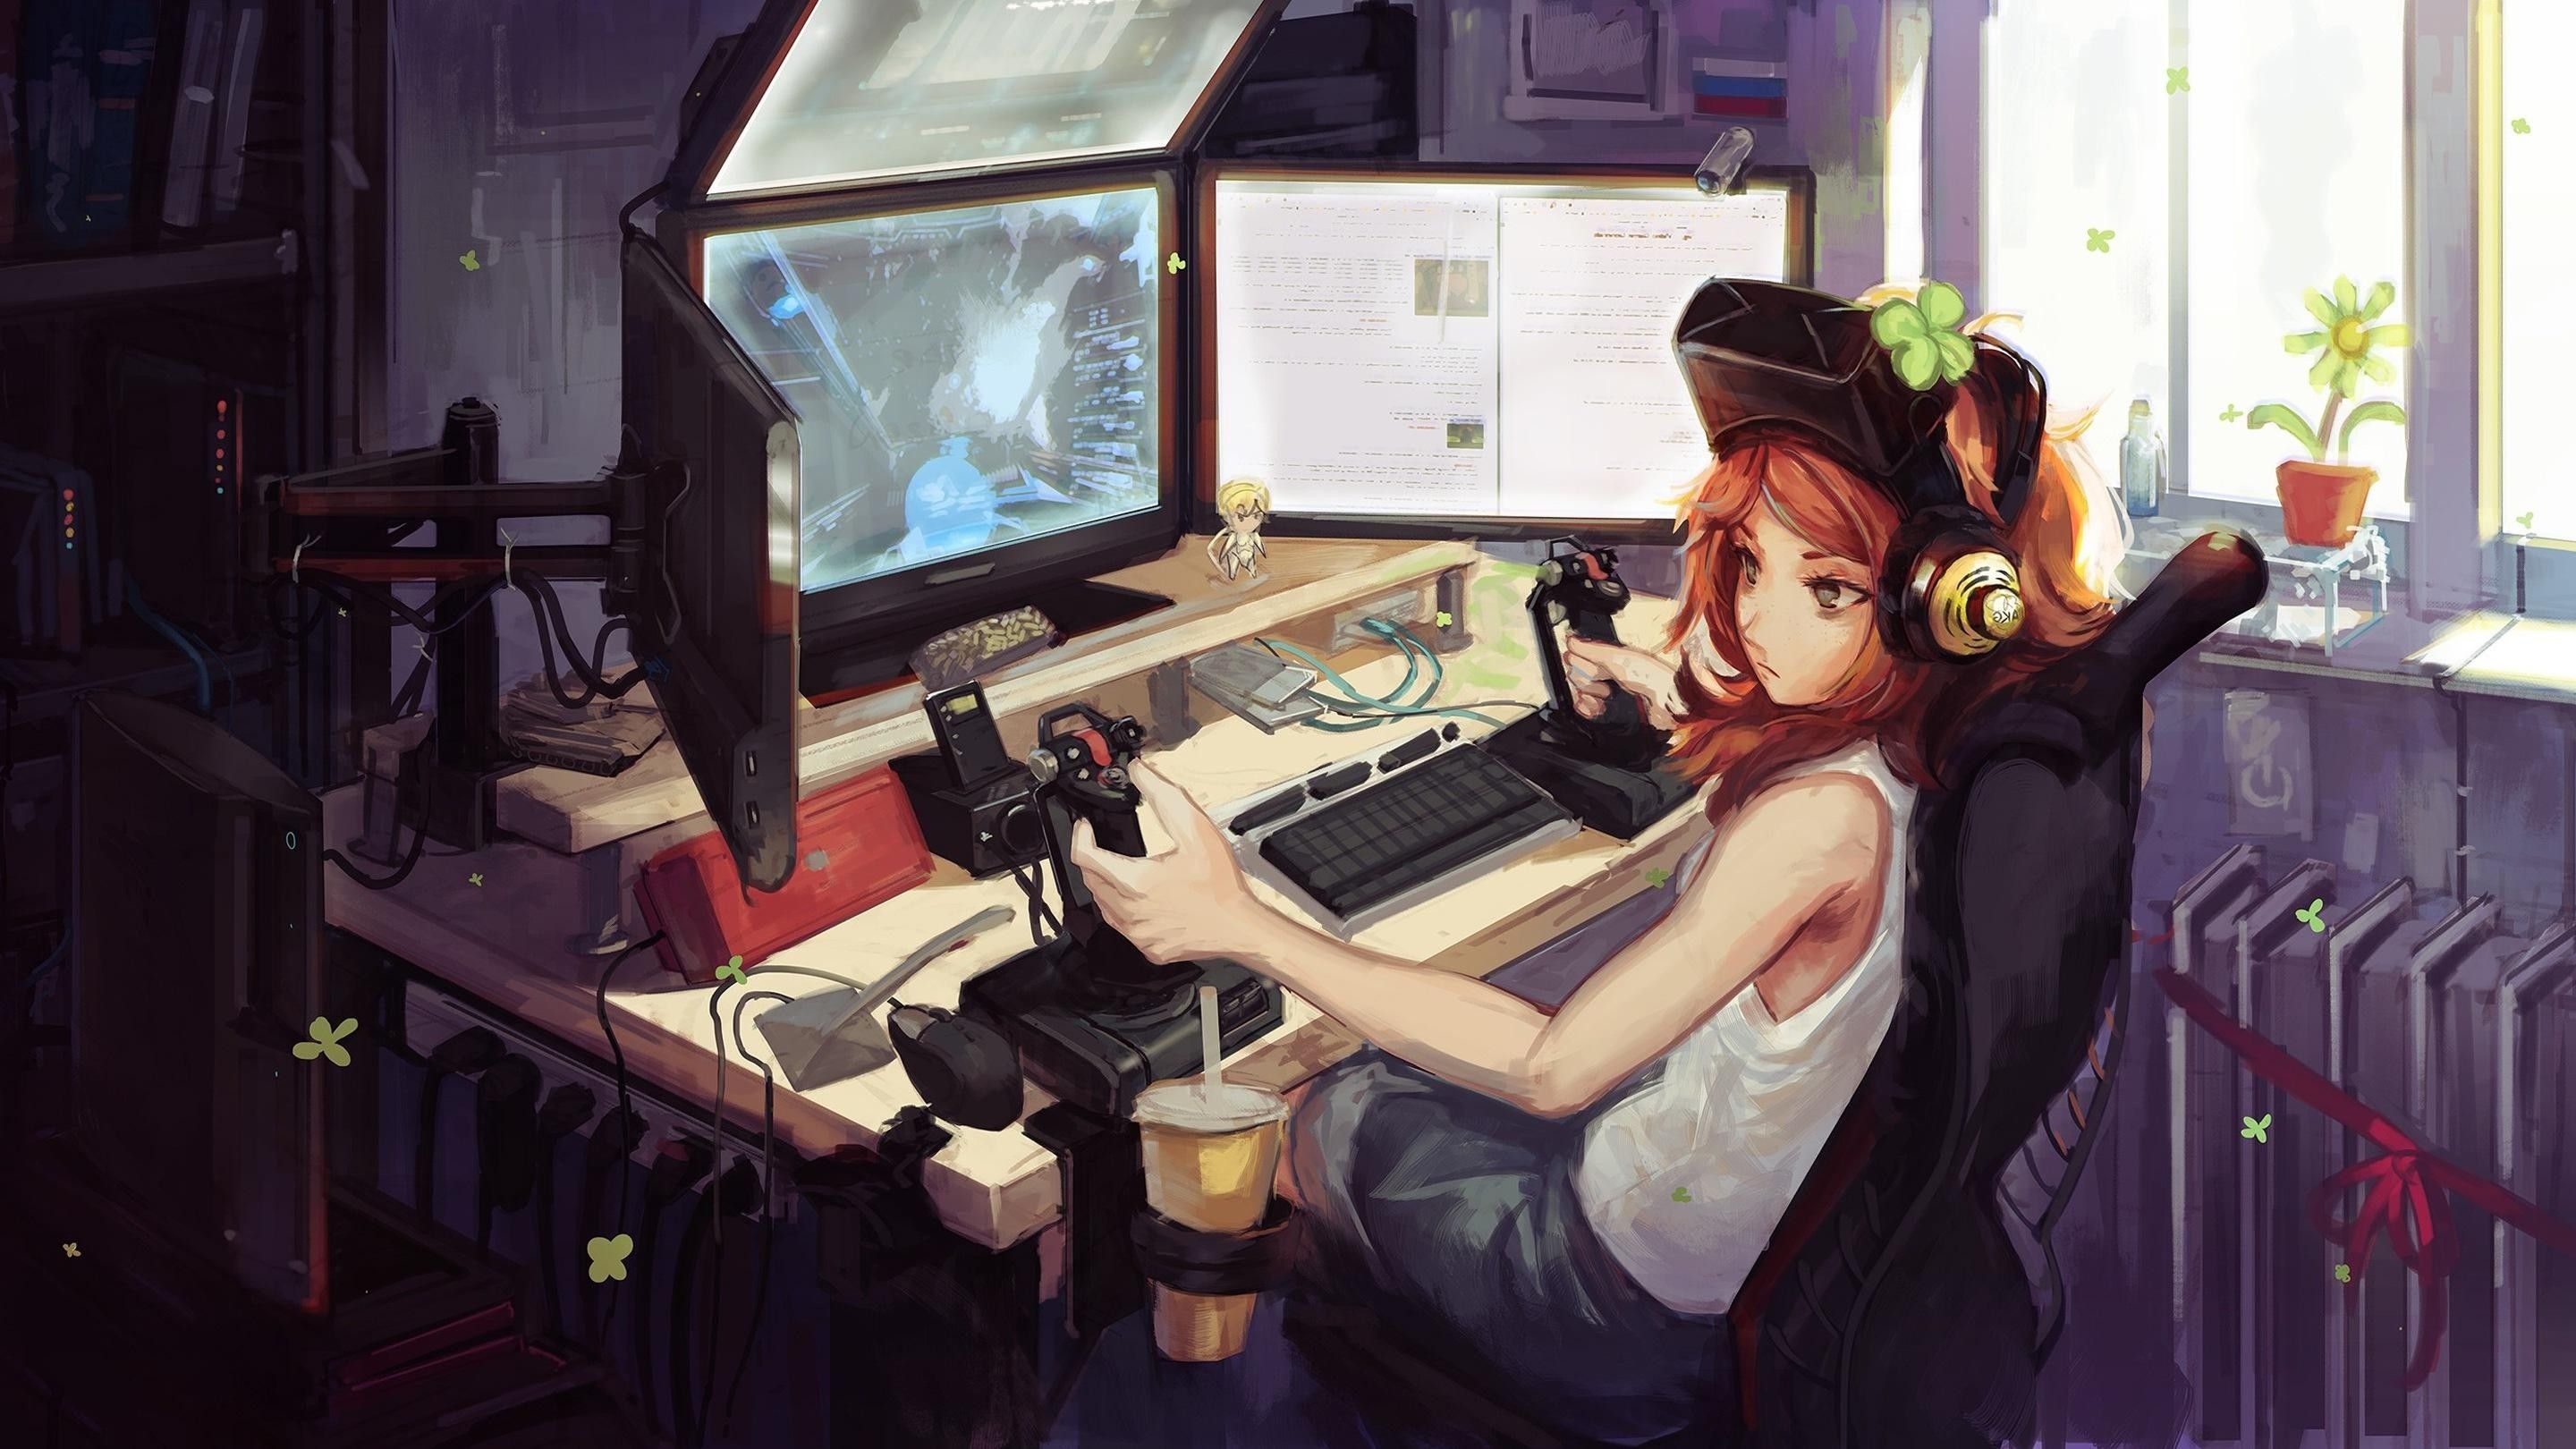 Anime Gamer Girls Wallpapers Wallpaper Cave Tons of awesome cute wallpapers for computer to download for free.